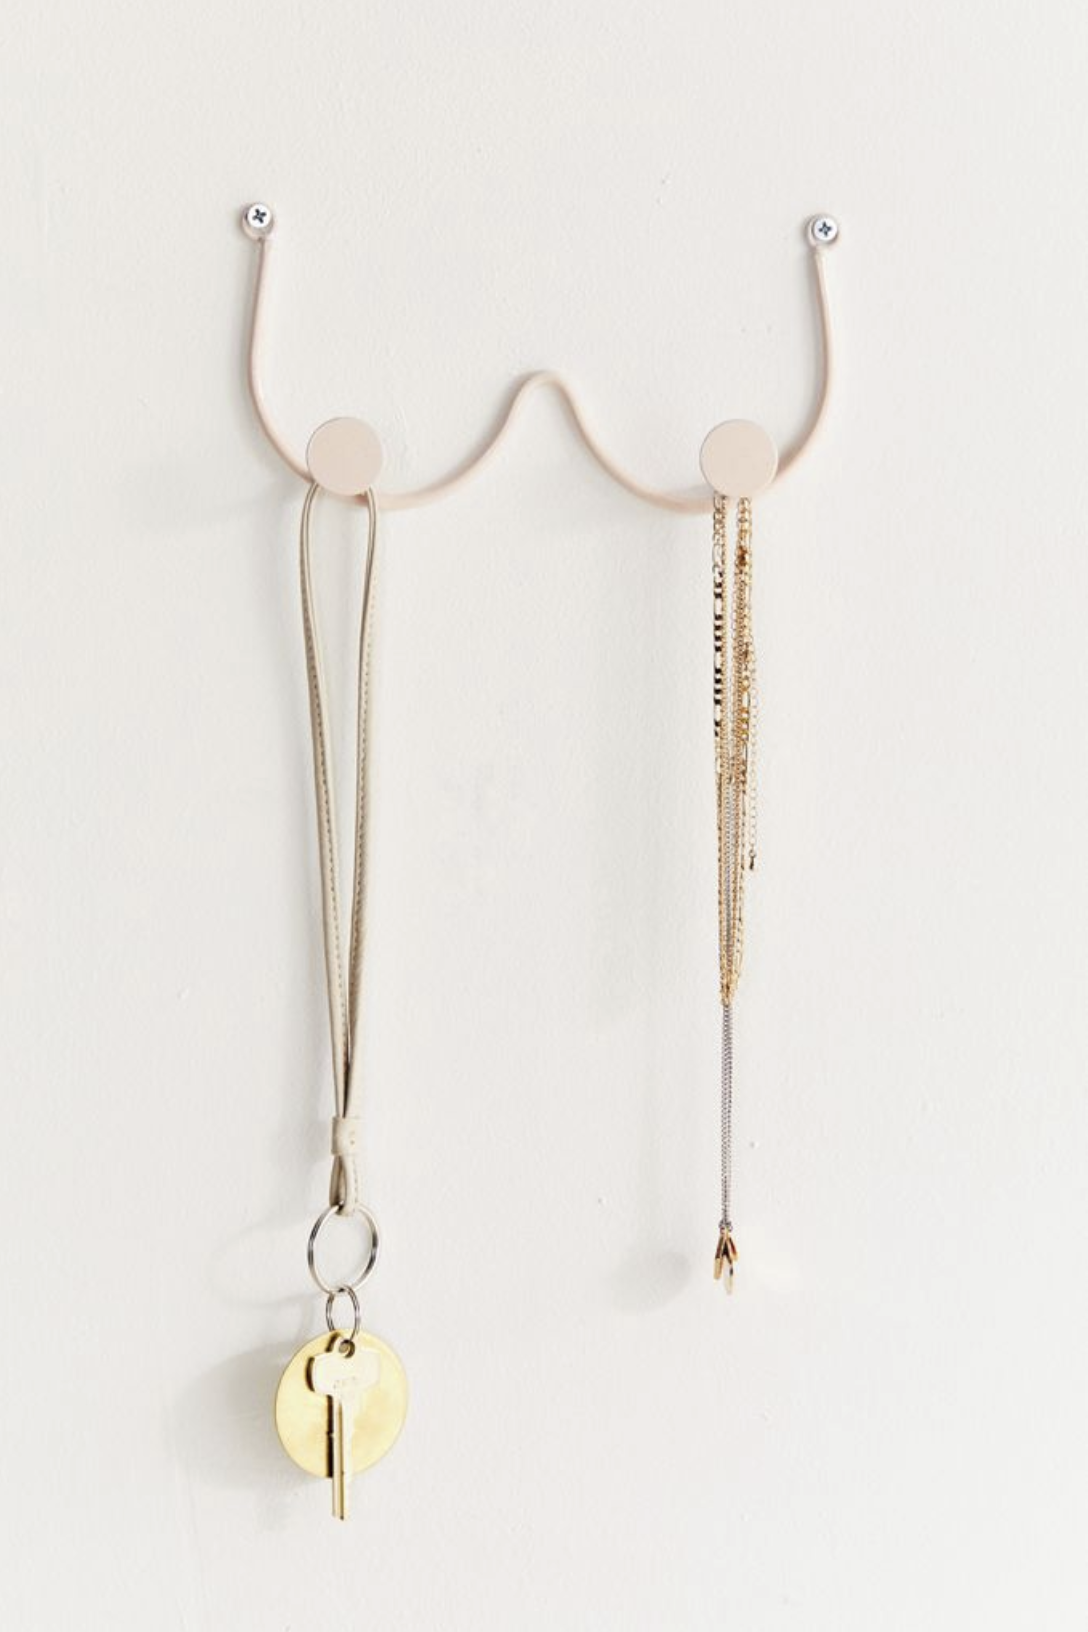 the rack with golden circular nipples that serve as the hooks. a necklace is hanging from one nipple while a key lanyard hangs from the other.